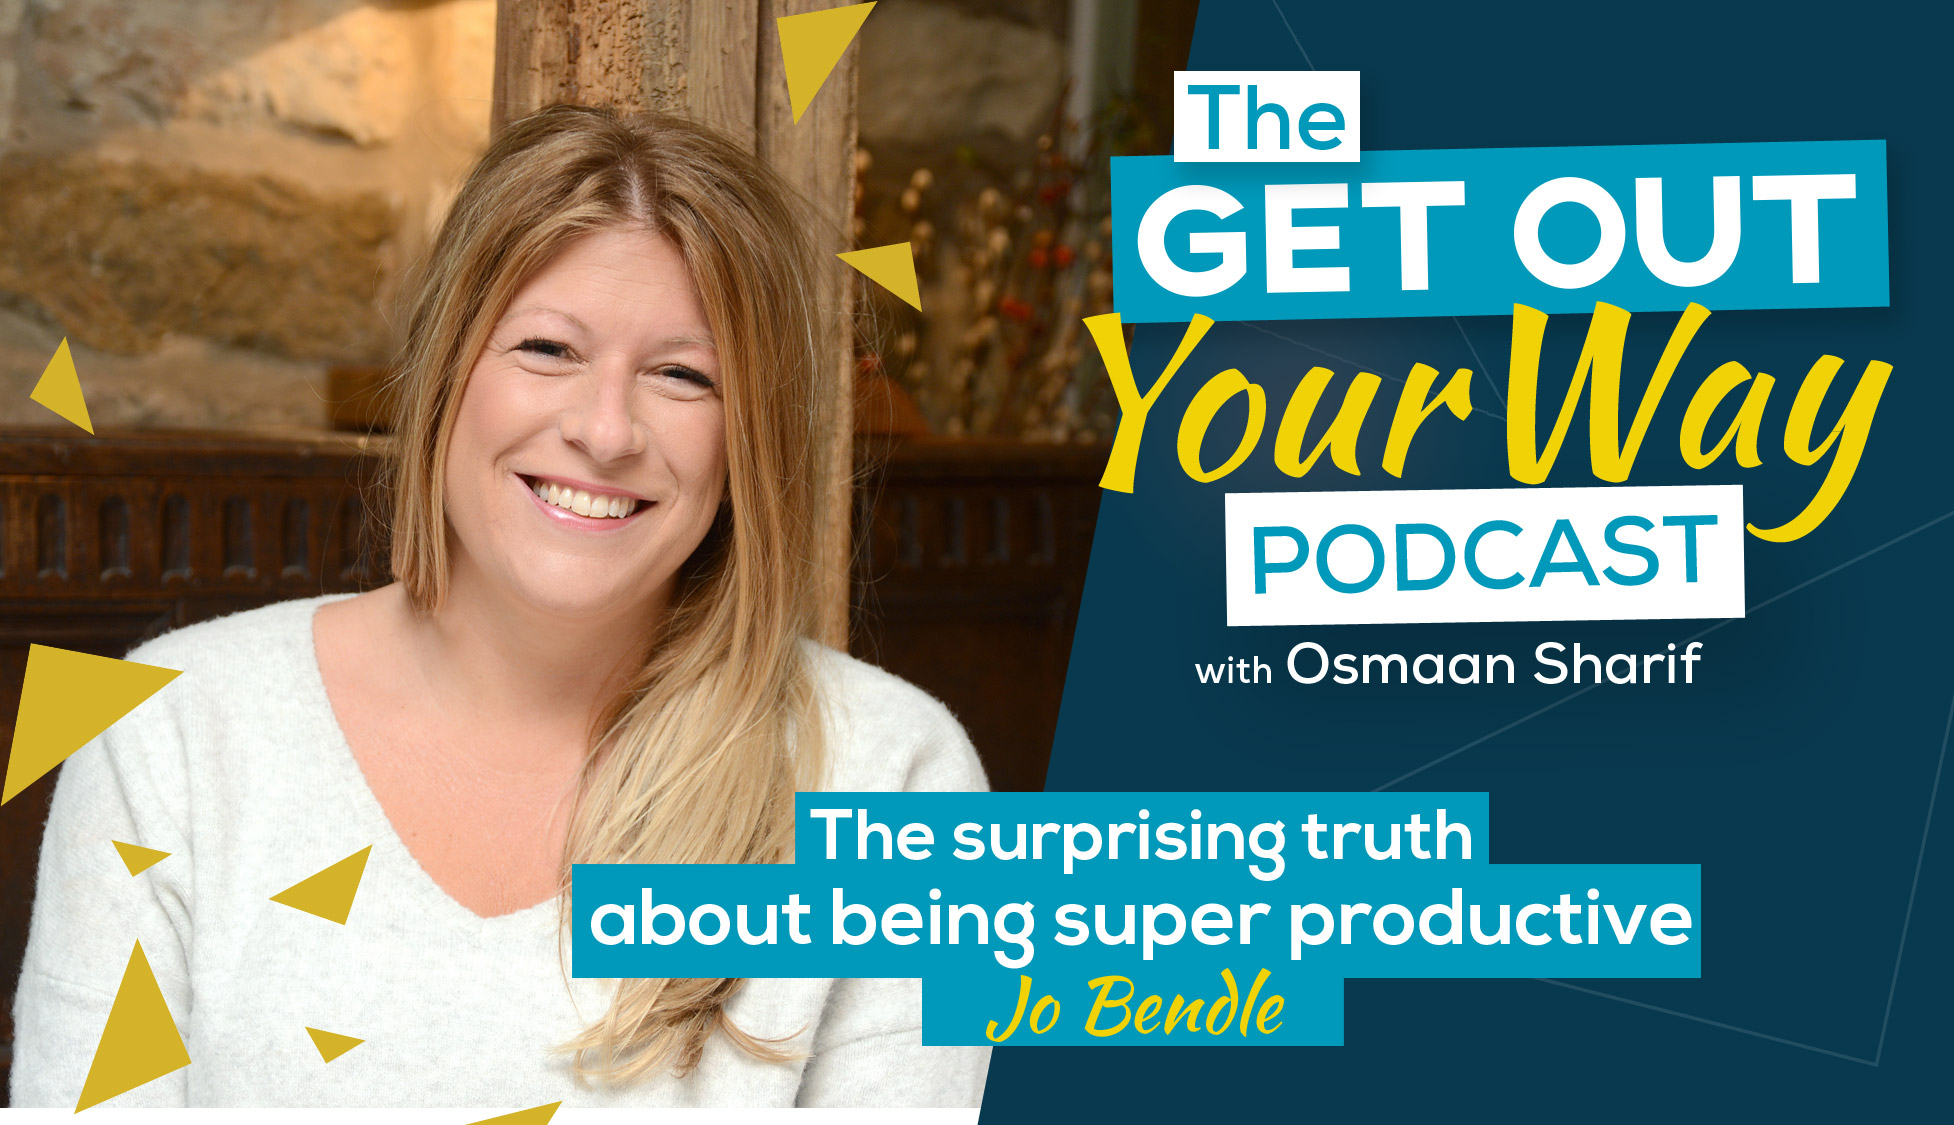 The surprising truth about being super productive with Jo Bendle